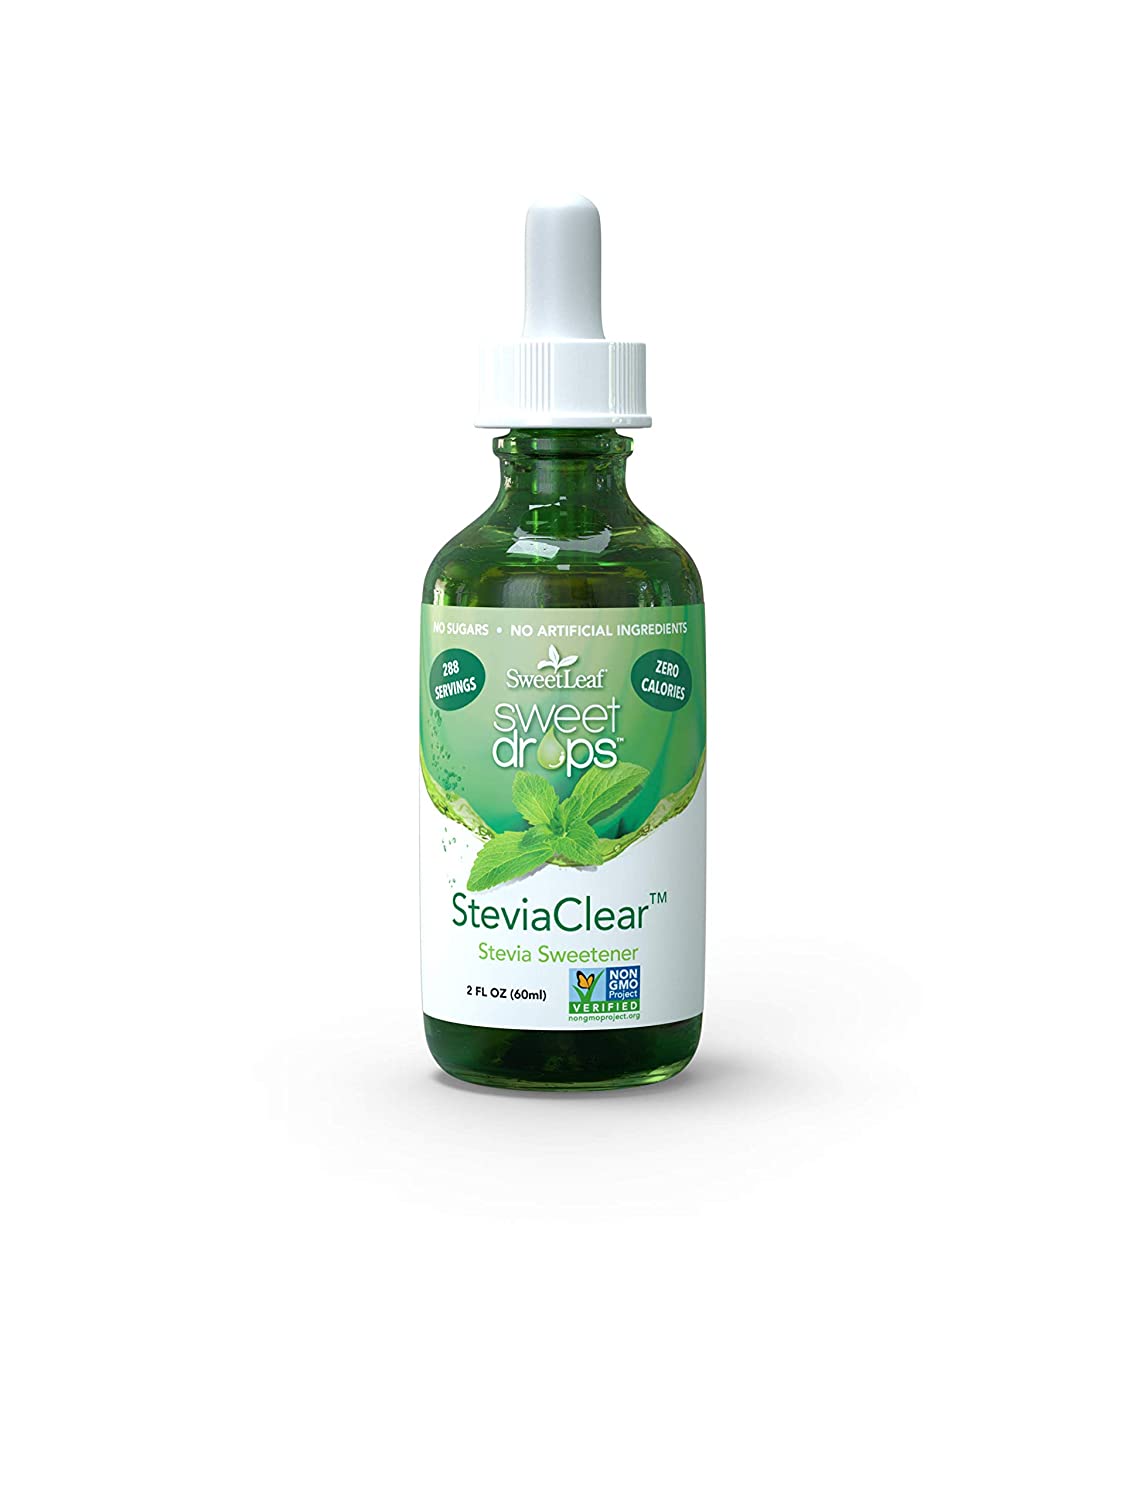 Lọ dung dịch đường cỏ ngọt (kiêng) SWEETLEAF STEVIA SteviaClear Liquid Extract 60 ml, zero-calorie, zero-carbohydrate, eat clean, keto, gymer